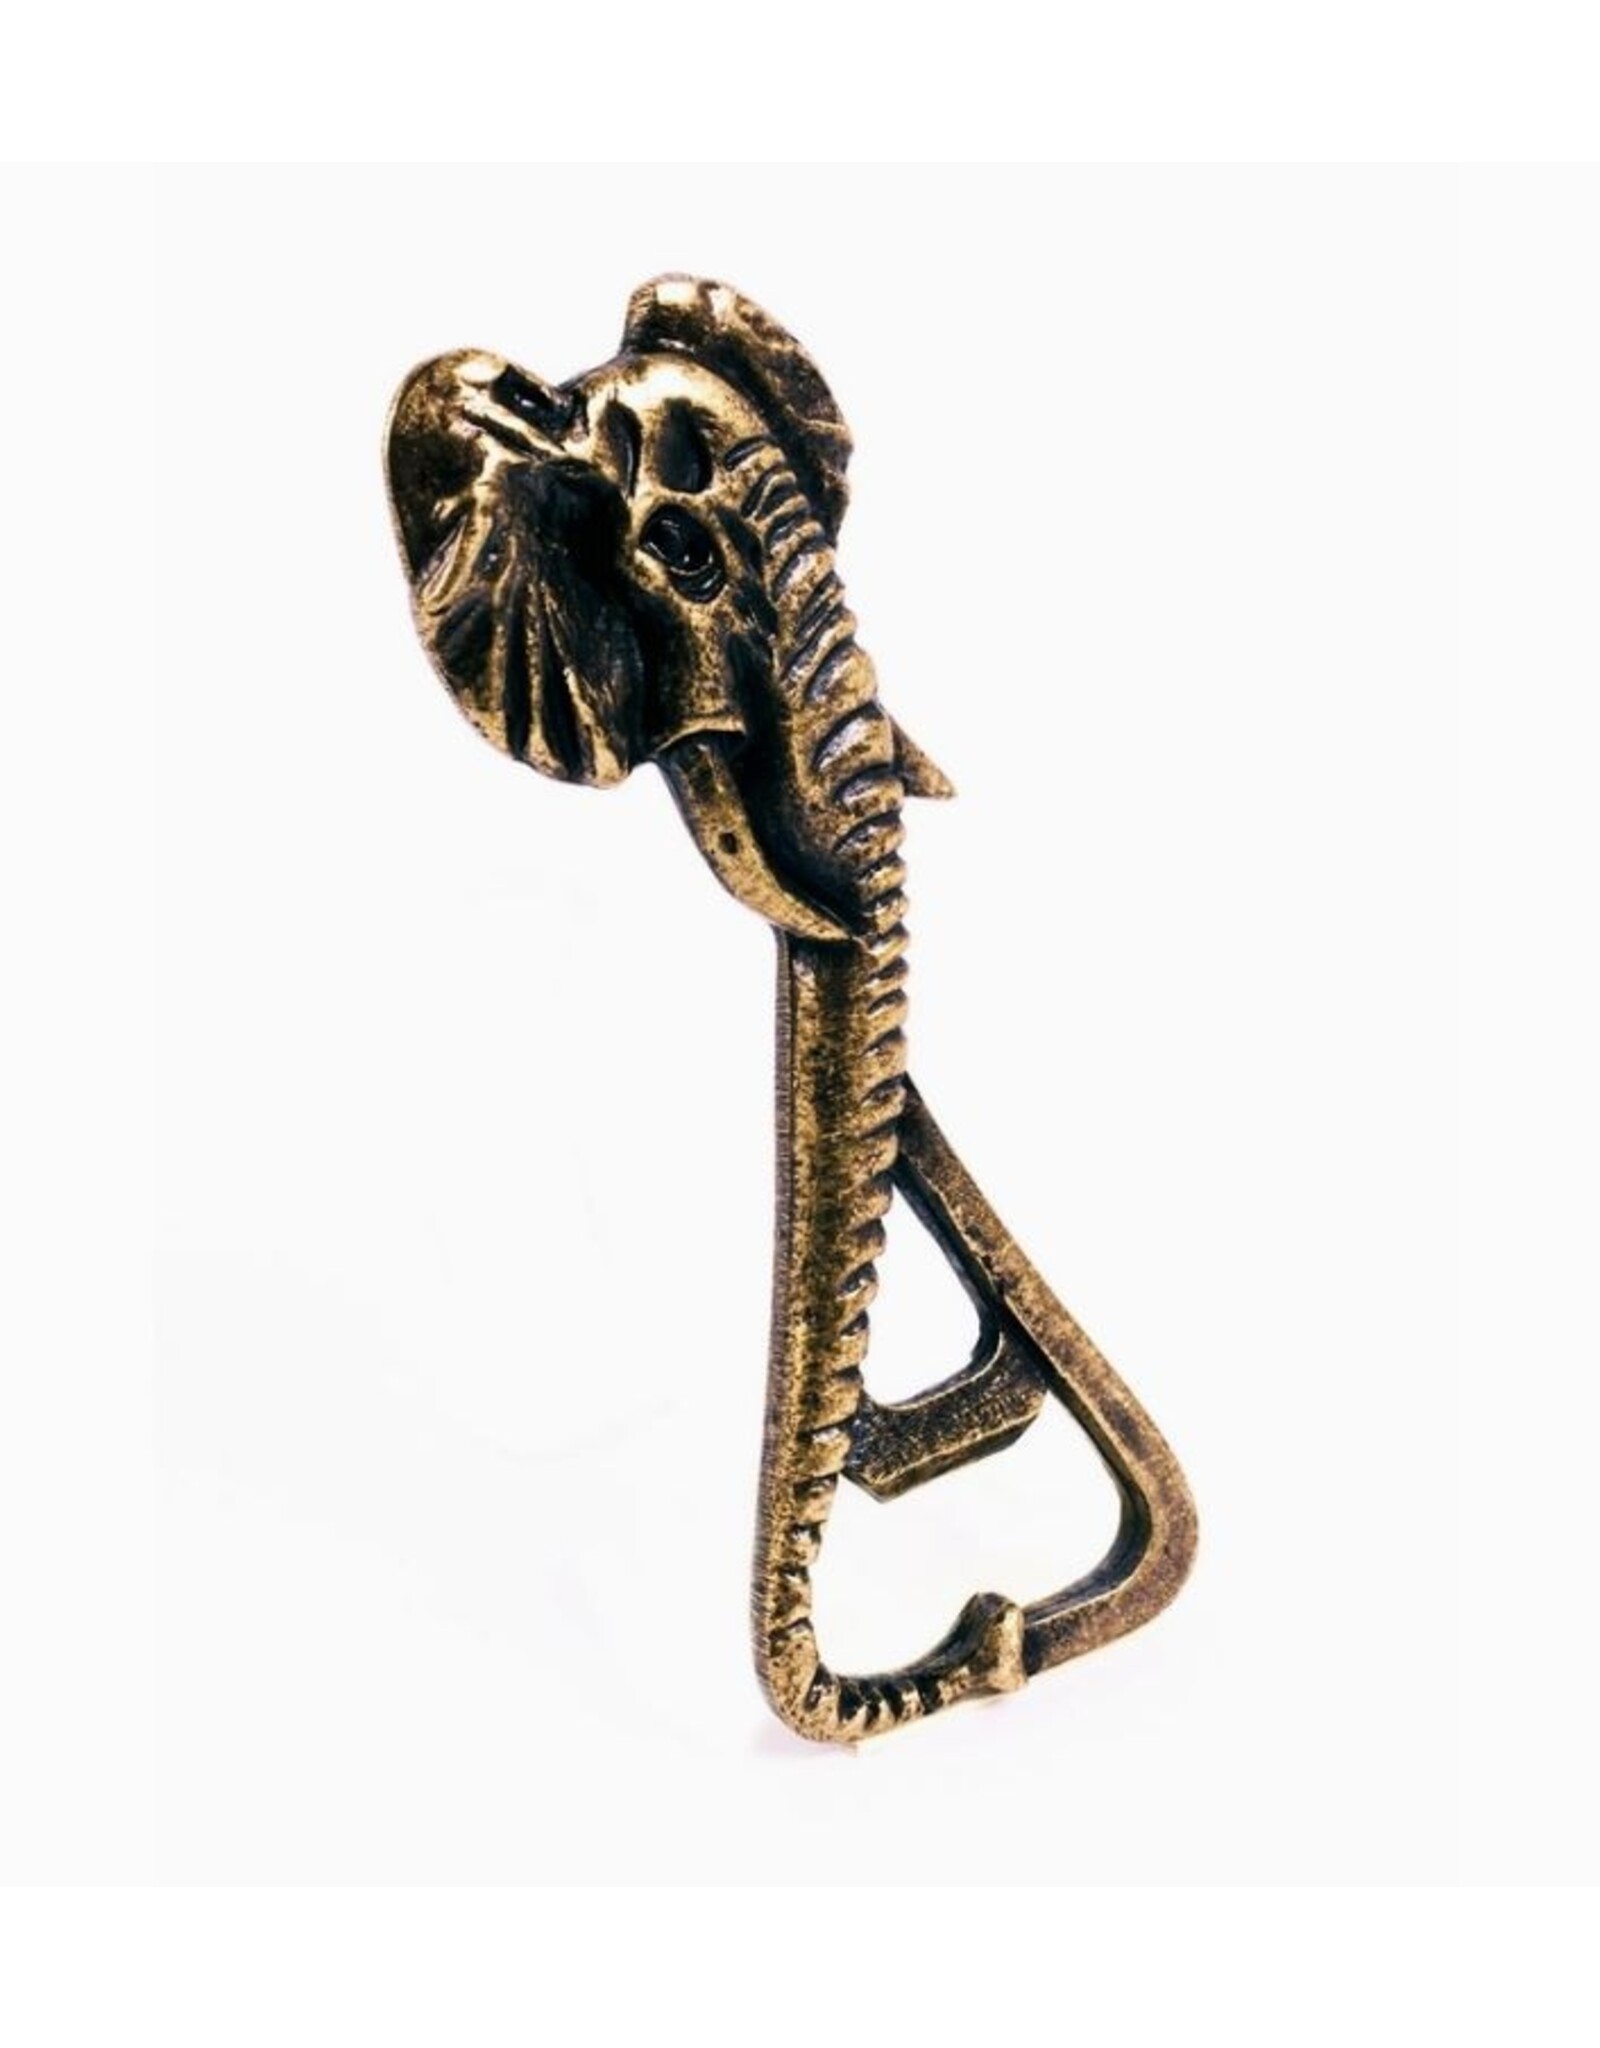 South Africa Elephant Trunk Bottle Opener, South Africa